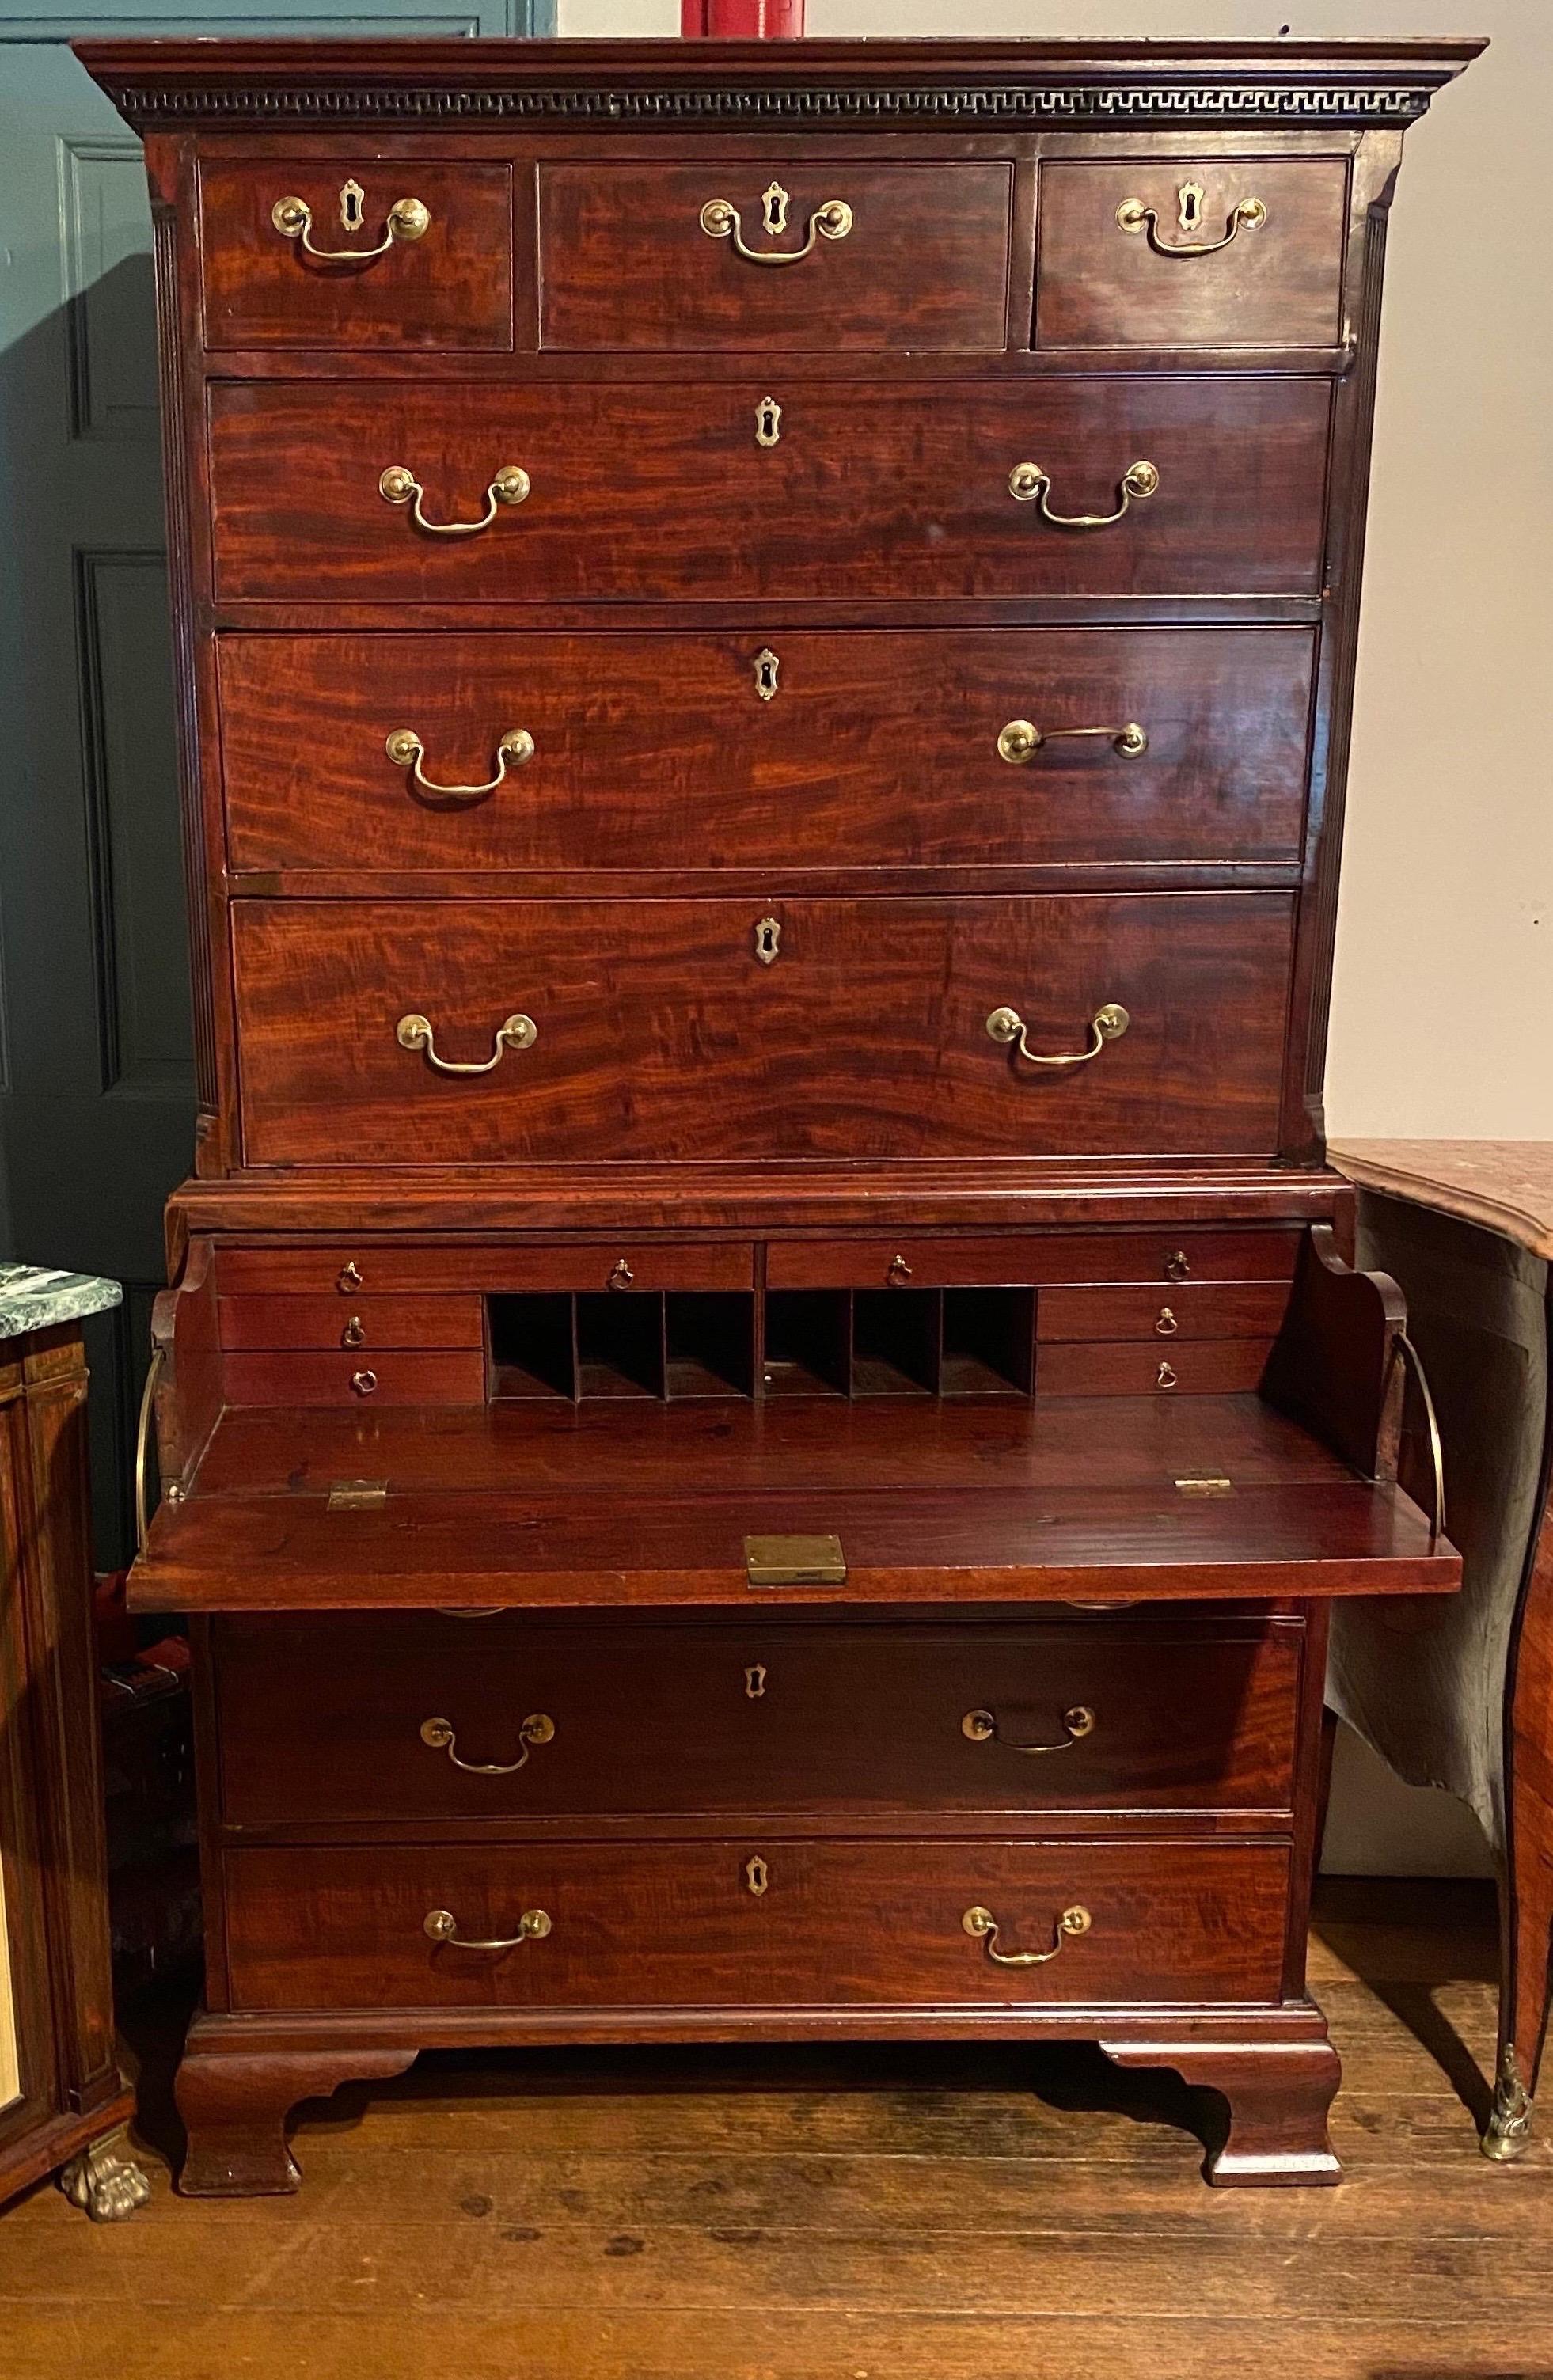 Great quality 18th century English mahogany chest on chest with a secretary desk in the top drawer of the bottom half. Corners are canted and reeded with lambs tongue and wall of troy moldings around the entire top.